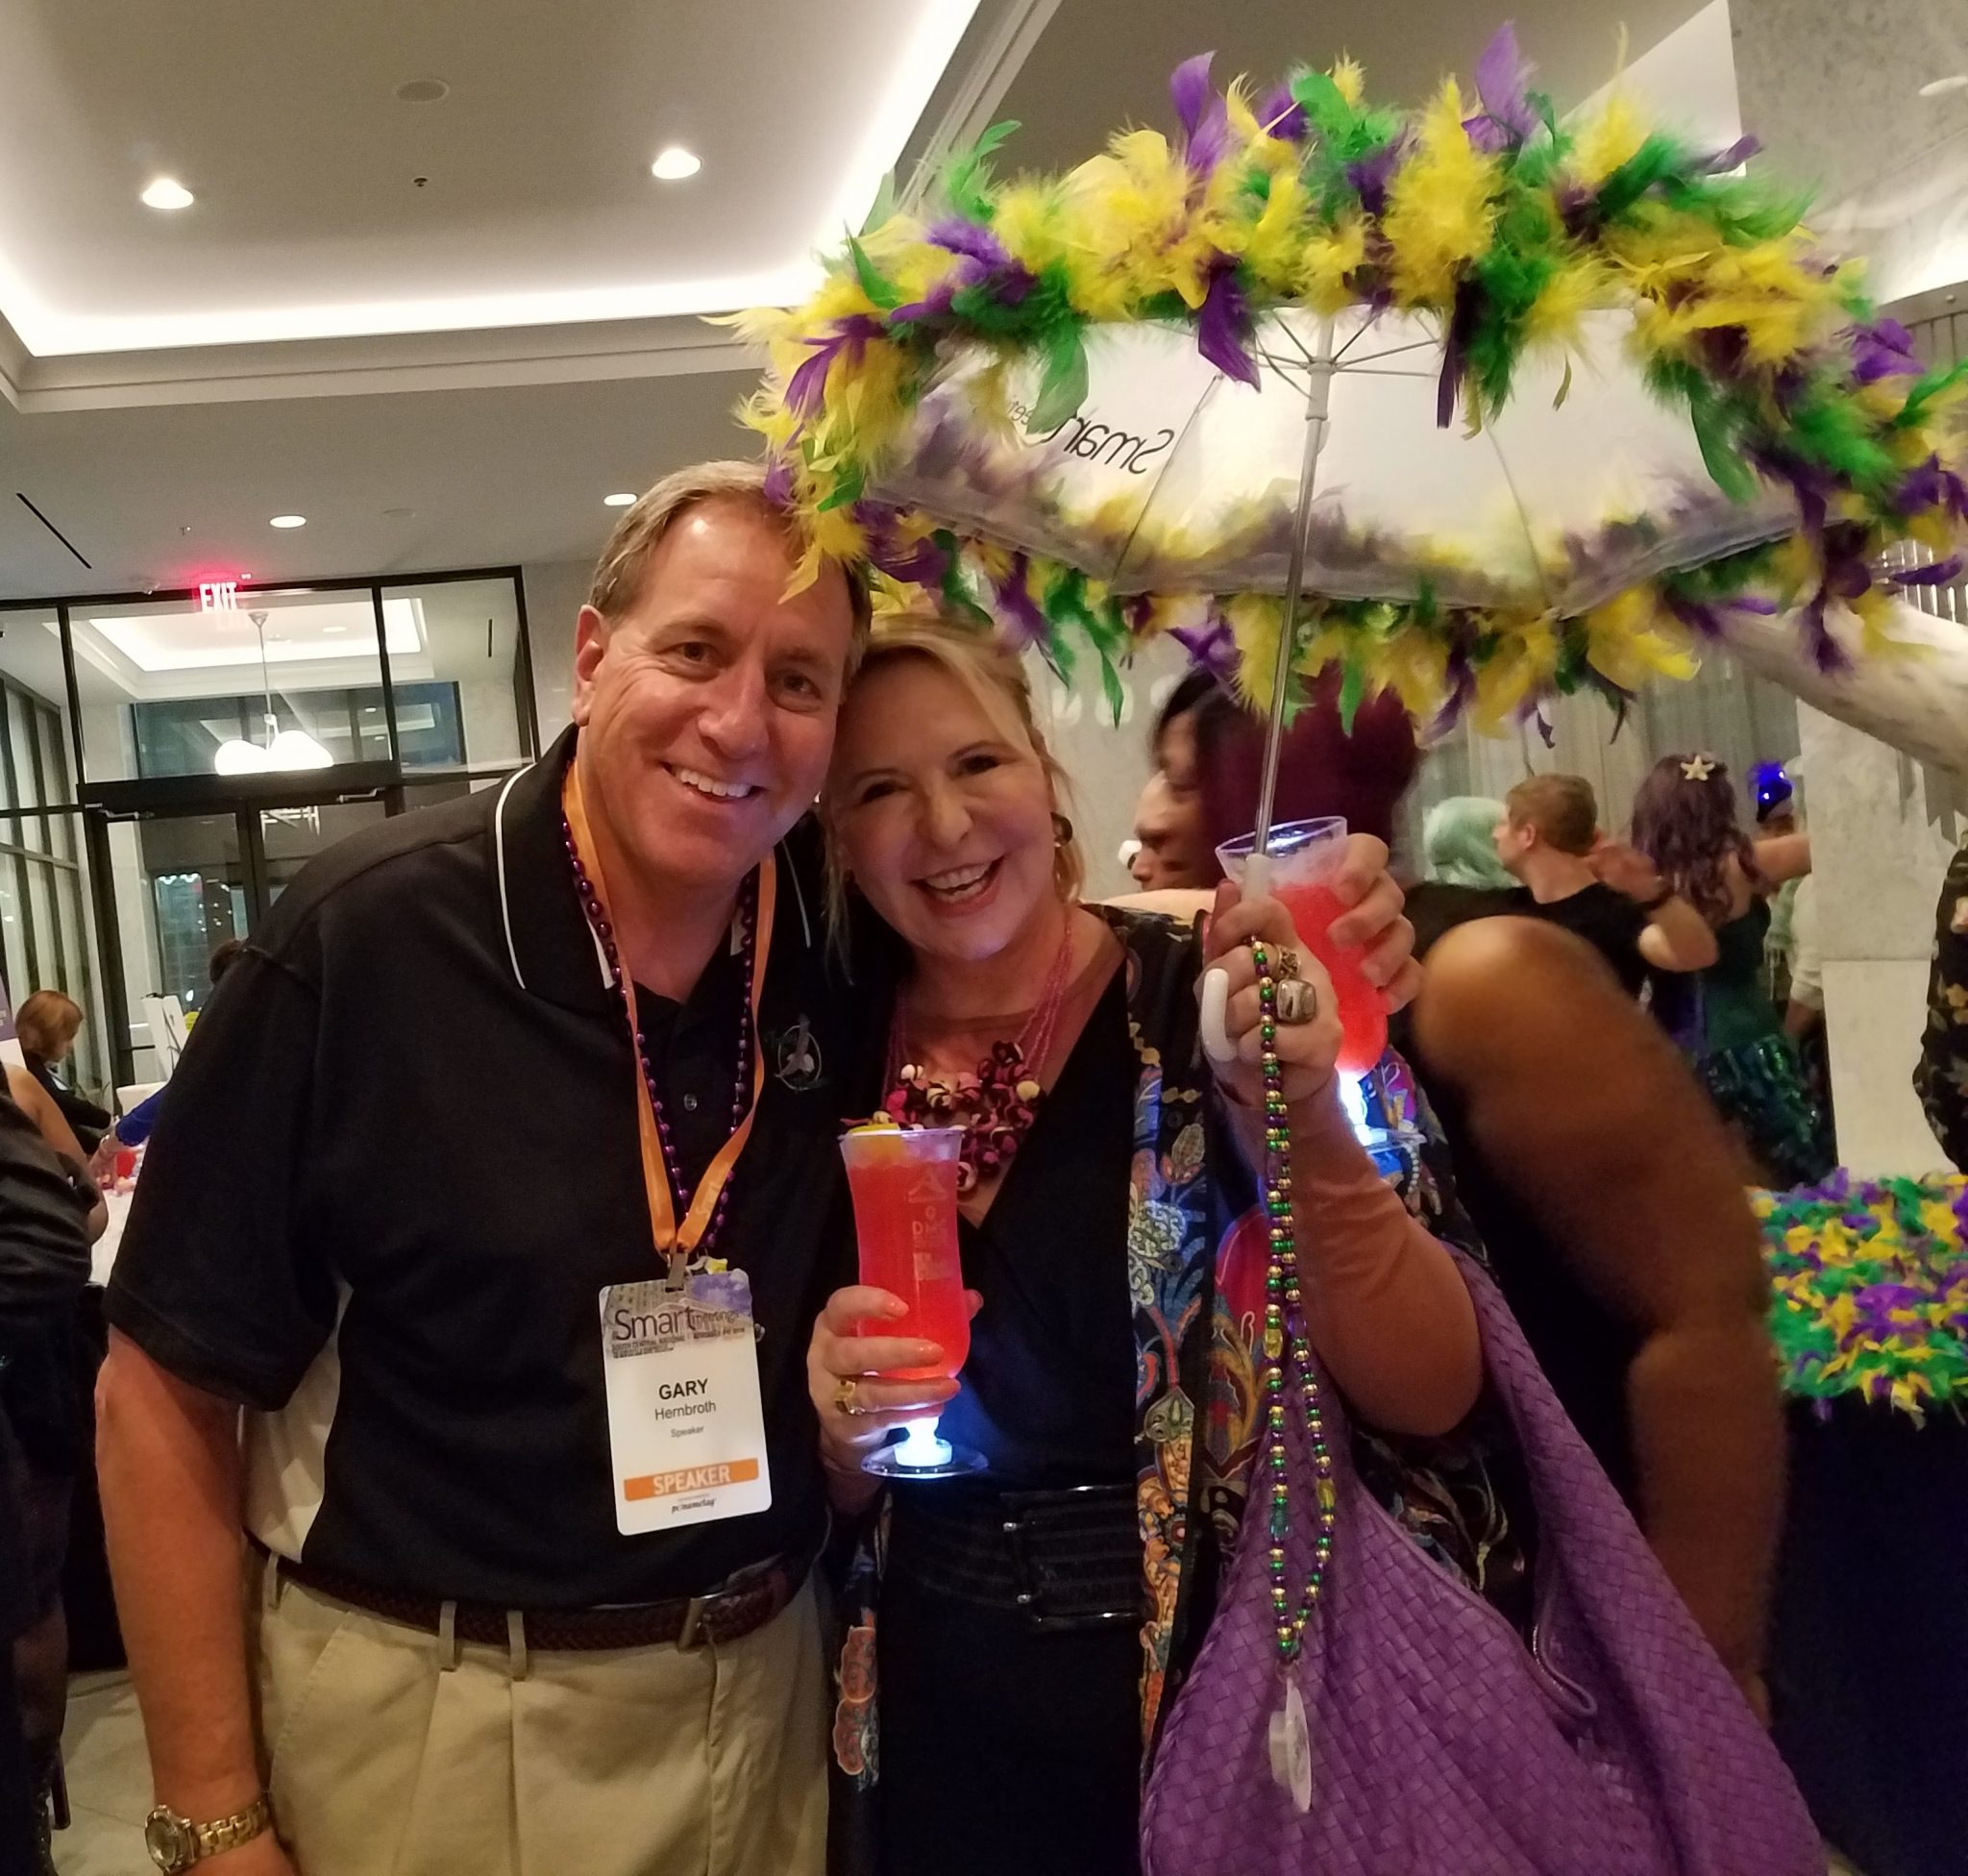 Gary and SMART MEETINGS Magazine publisher Marin Bright are revved up for the French Quarter parade for attendees prior to Gary’s keynote session the next day